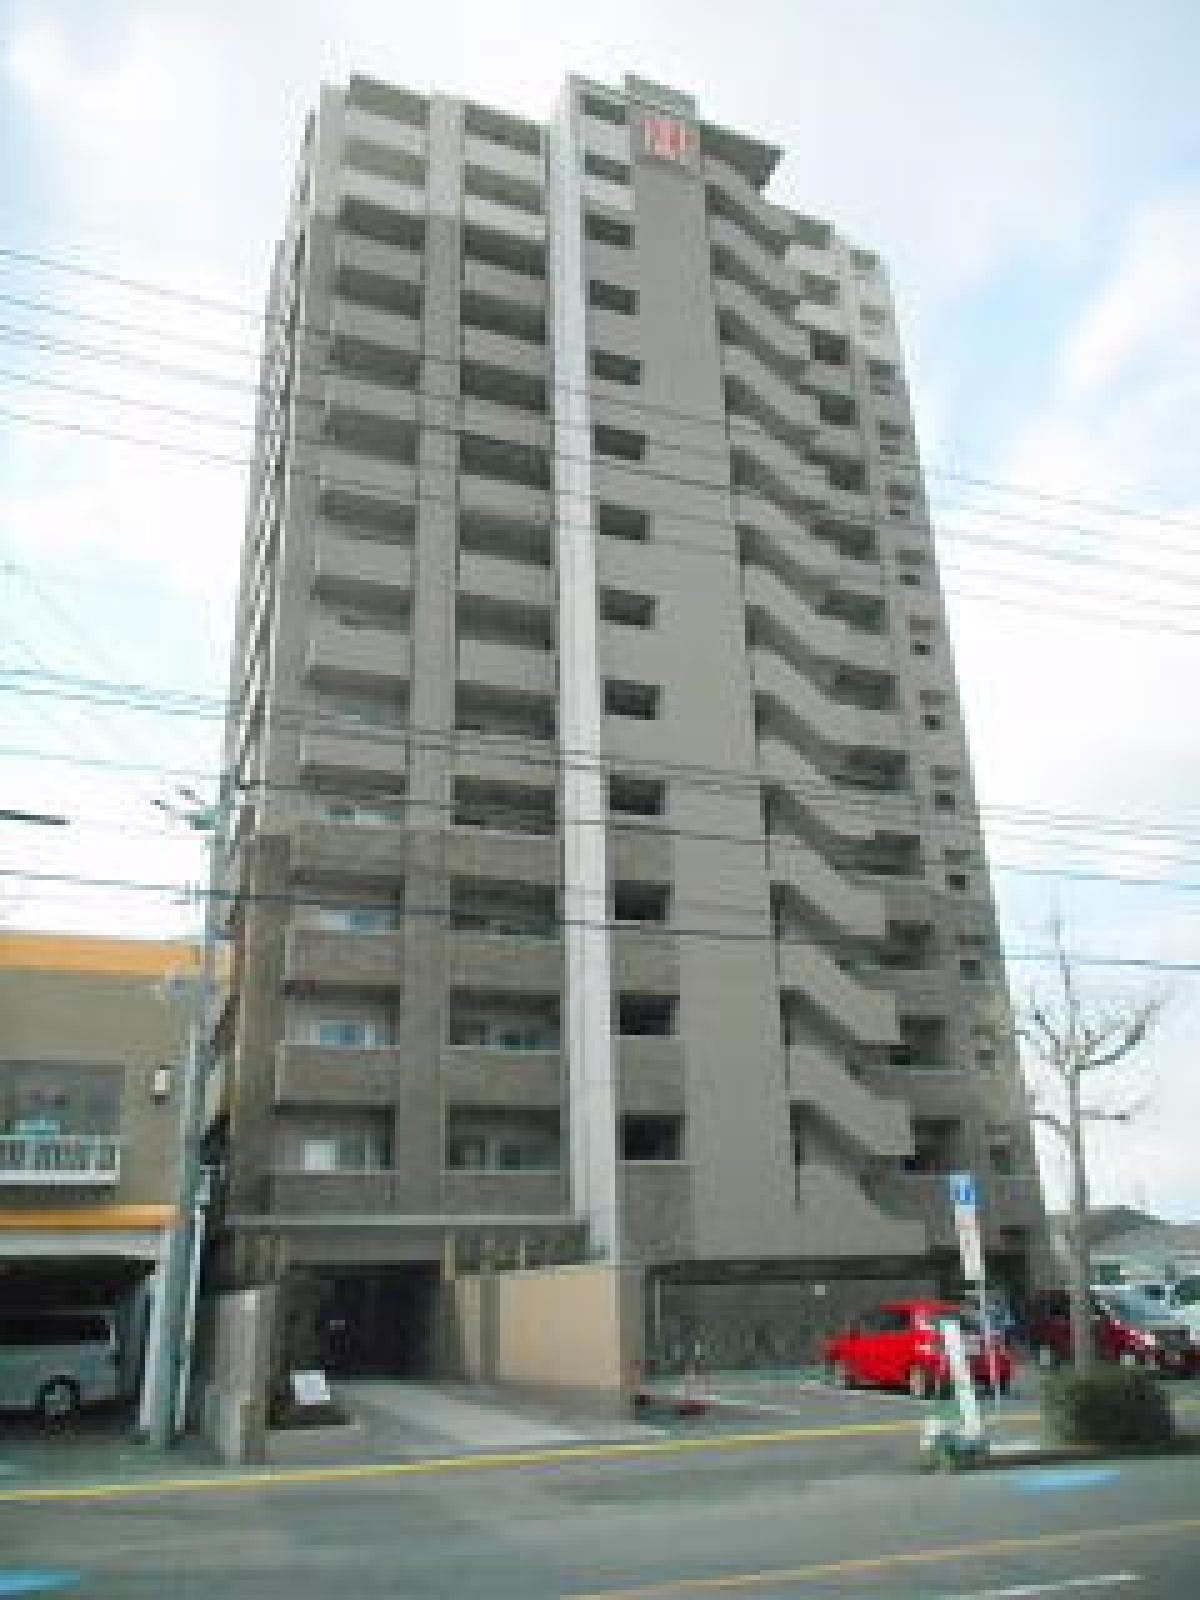 Picture of Apartment For Sale in Ube Shi, Yamaguchi, Japan